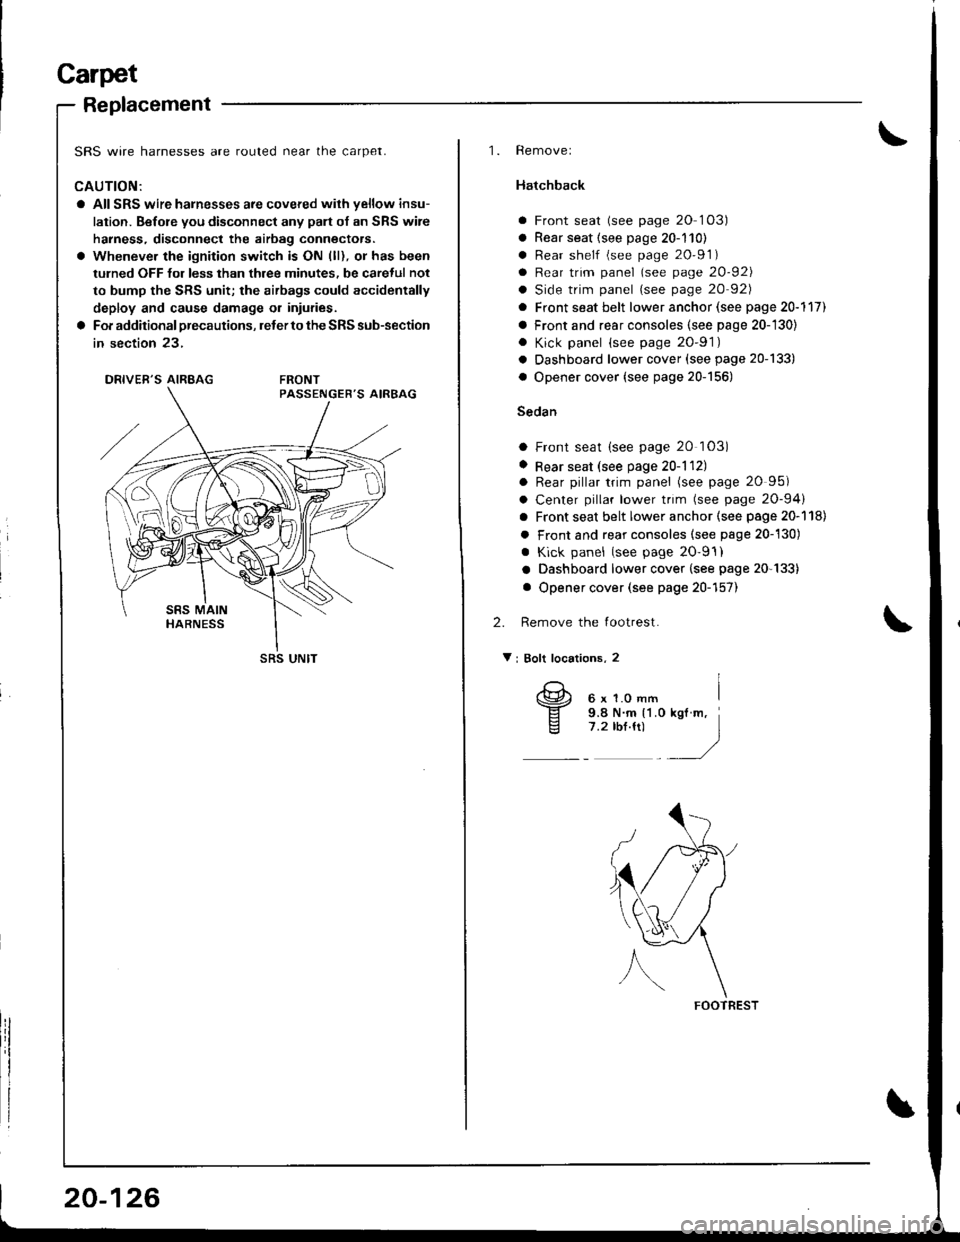 HONDA INTEGRA 1998 4.G Workshop Manual Carpet
Beplacement
SRS wire harnesses are routed near the carpet.
CAUTION:
a All SRS wire harnesses are covered wilh yellow insu-
lation. Before you disconnect any palt of an SRS wire
harness, disconn